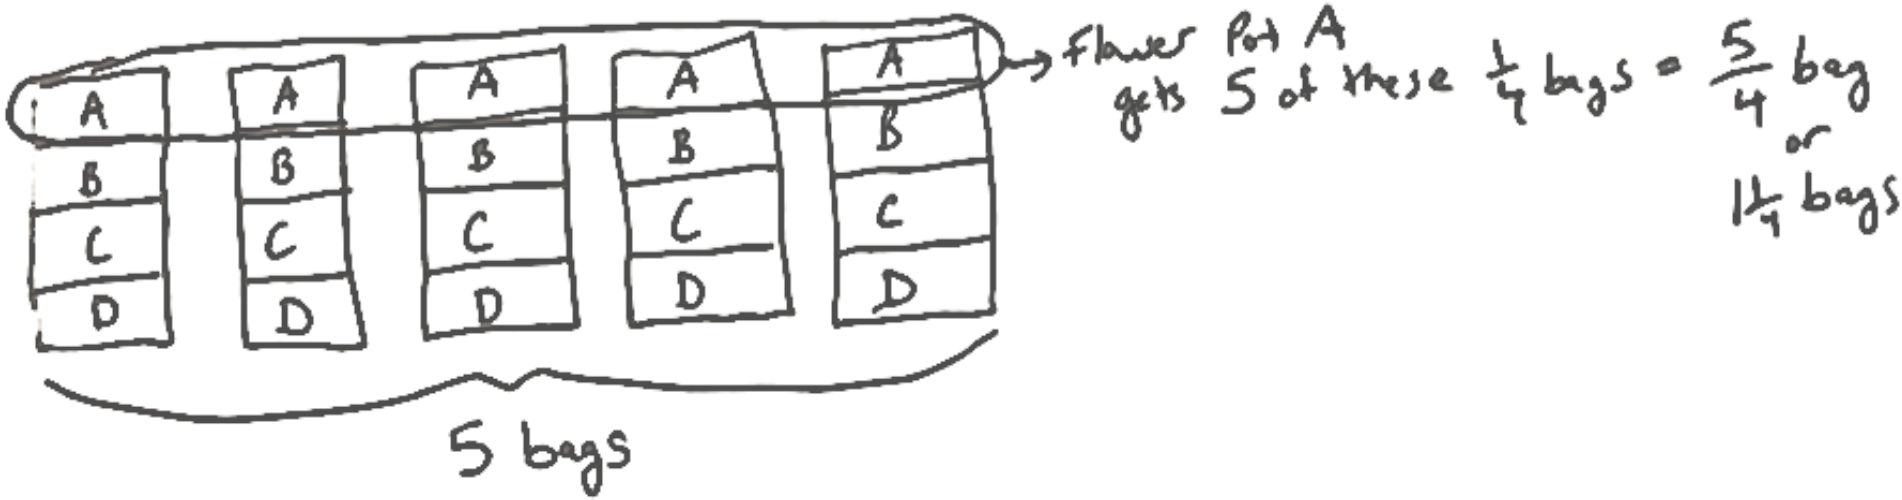 a set of 4 vertical 4-tape diagrams with each section of each diagram labeled from A to  D from top to bottom; a horizontal brace is drawn below all 4 tape diagrams and labeled '5 bags'; an oval is drawn around the top cells and labeled, 'Flower pot A gets 5 of these one-quarter bags = five-fourths bag or one and one-fourth bag'